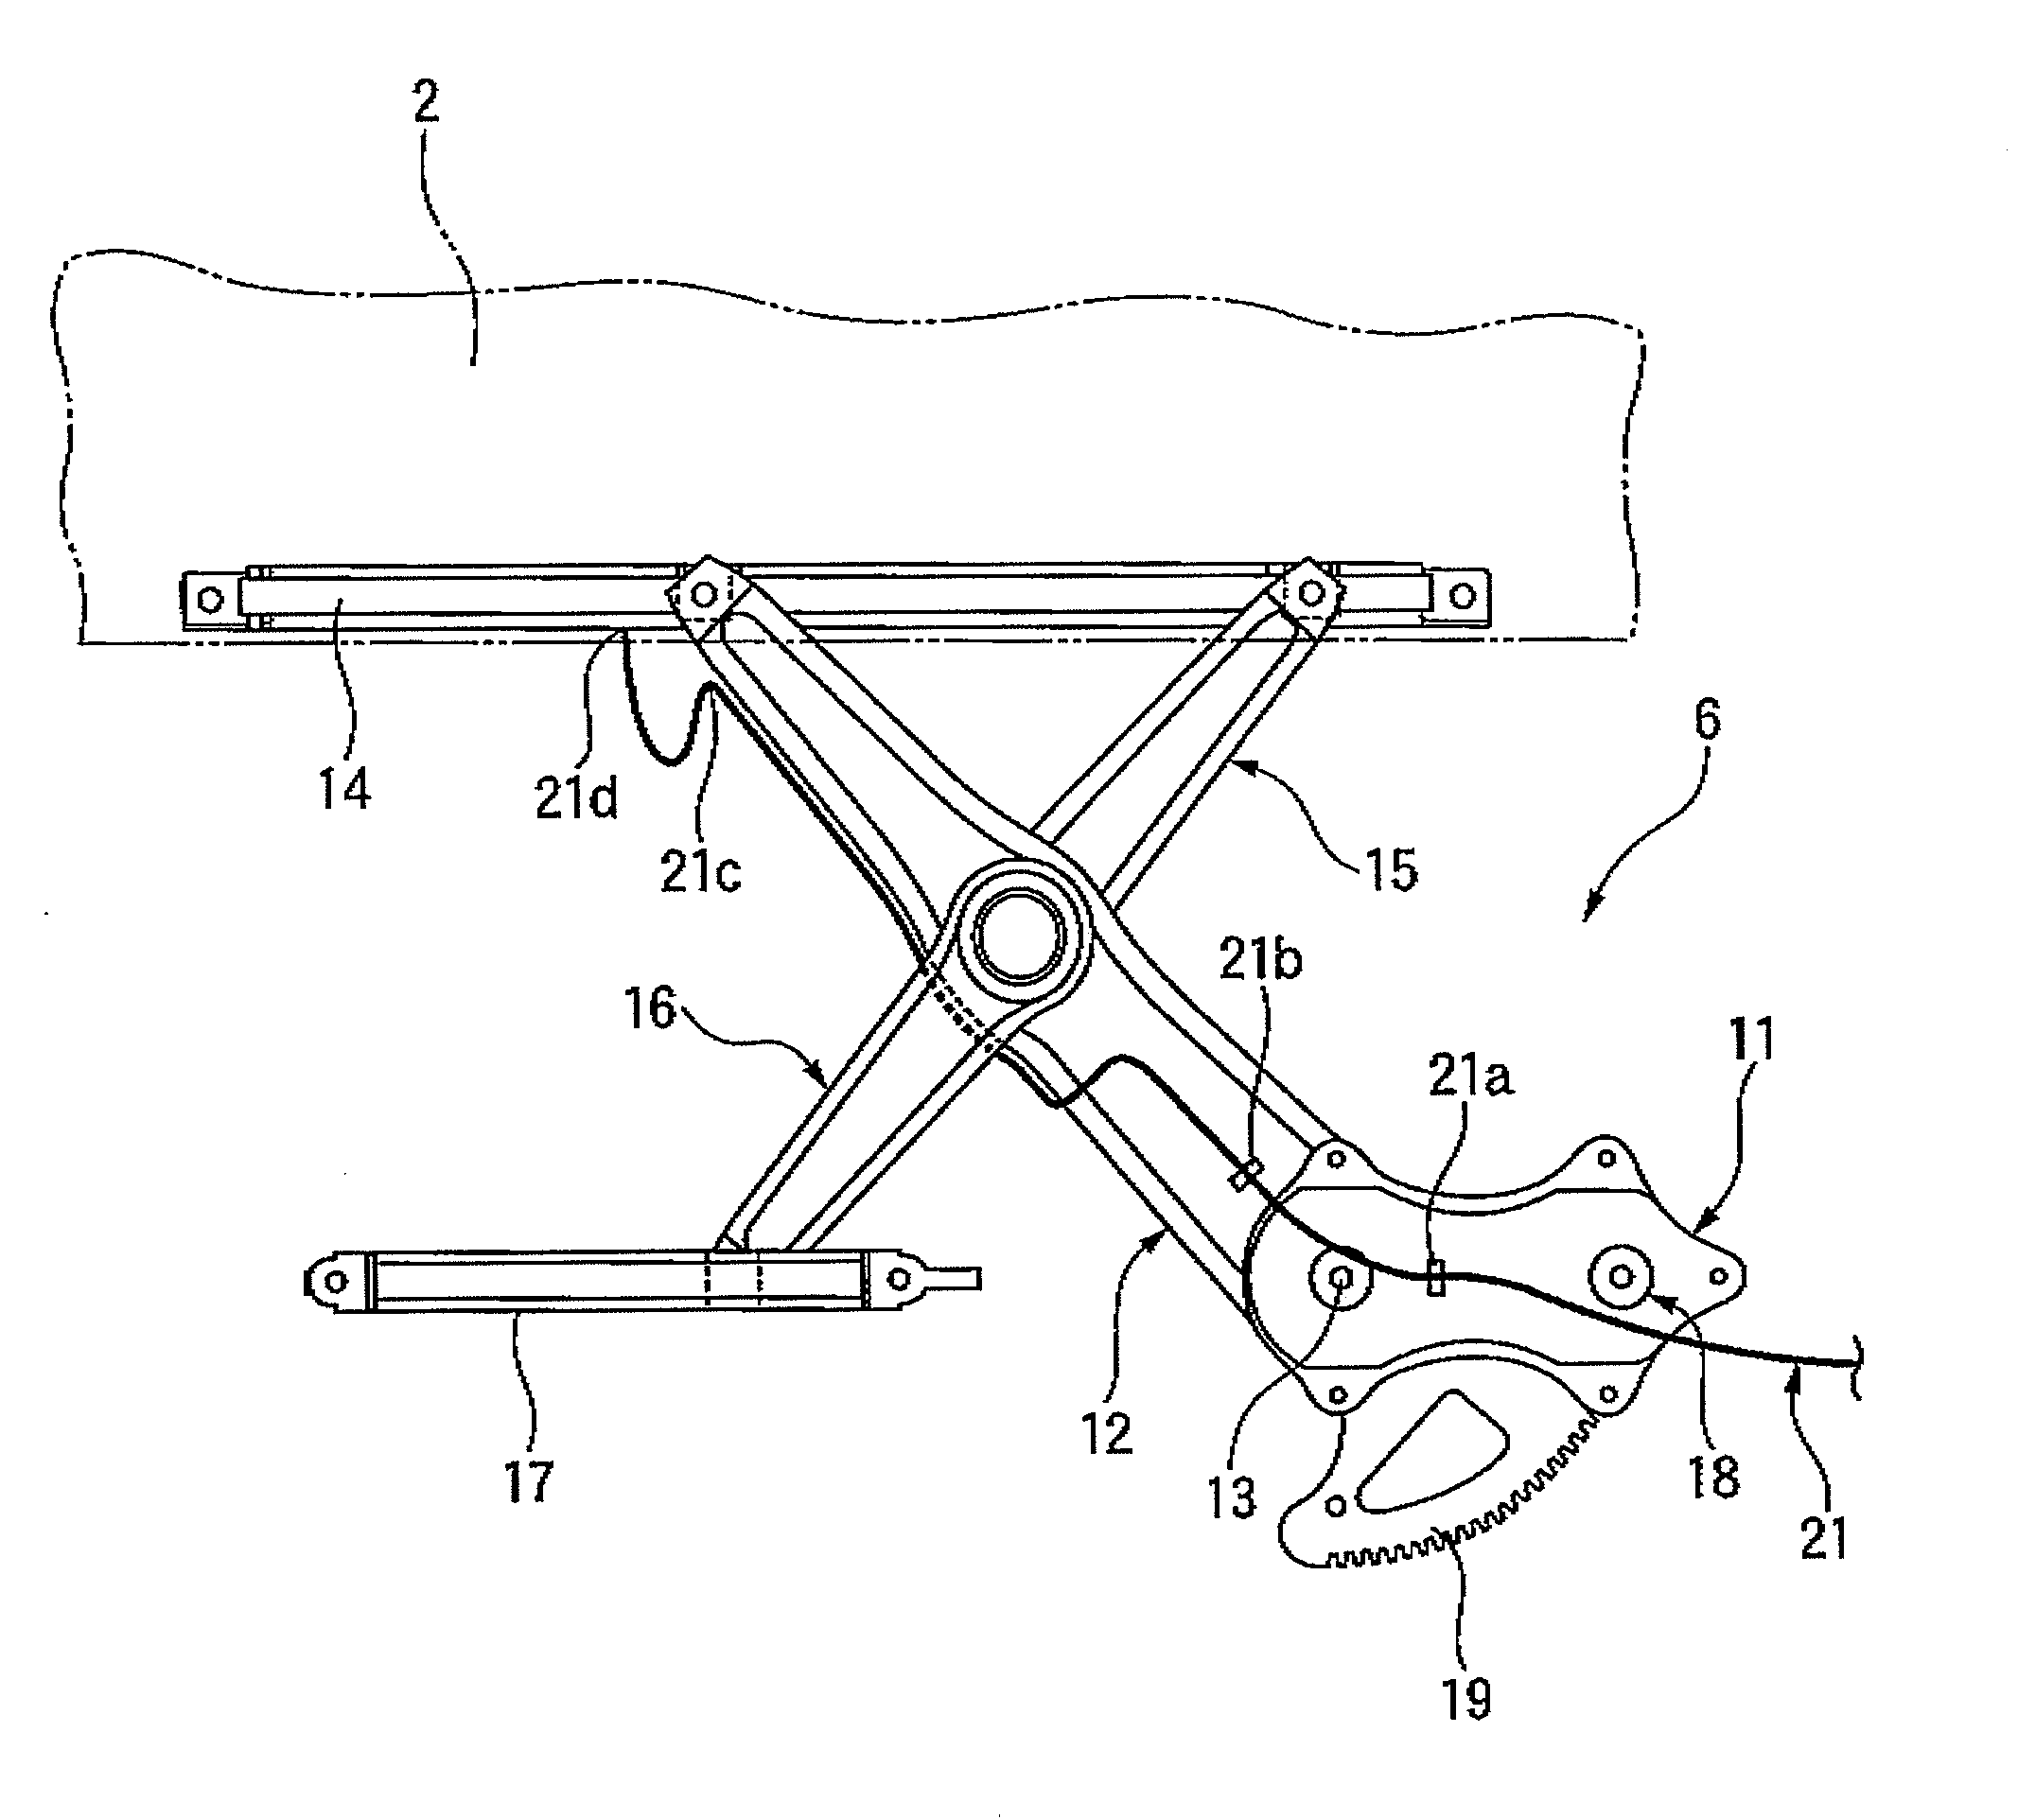 Electric power-feeding structure